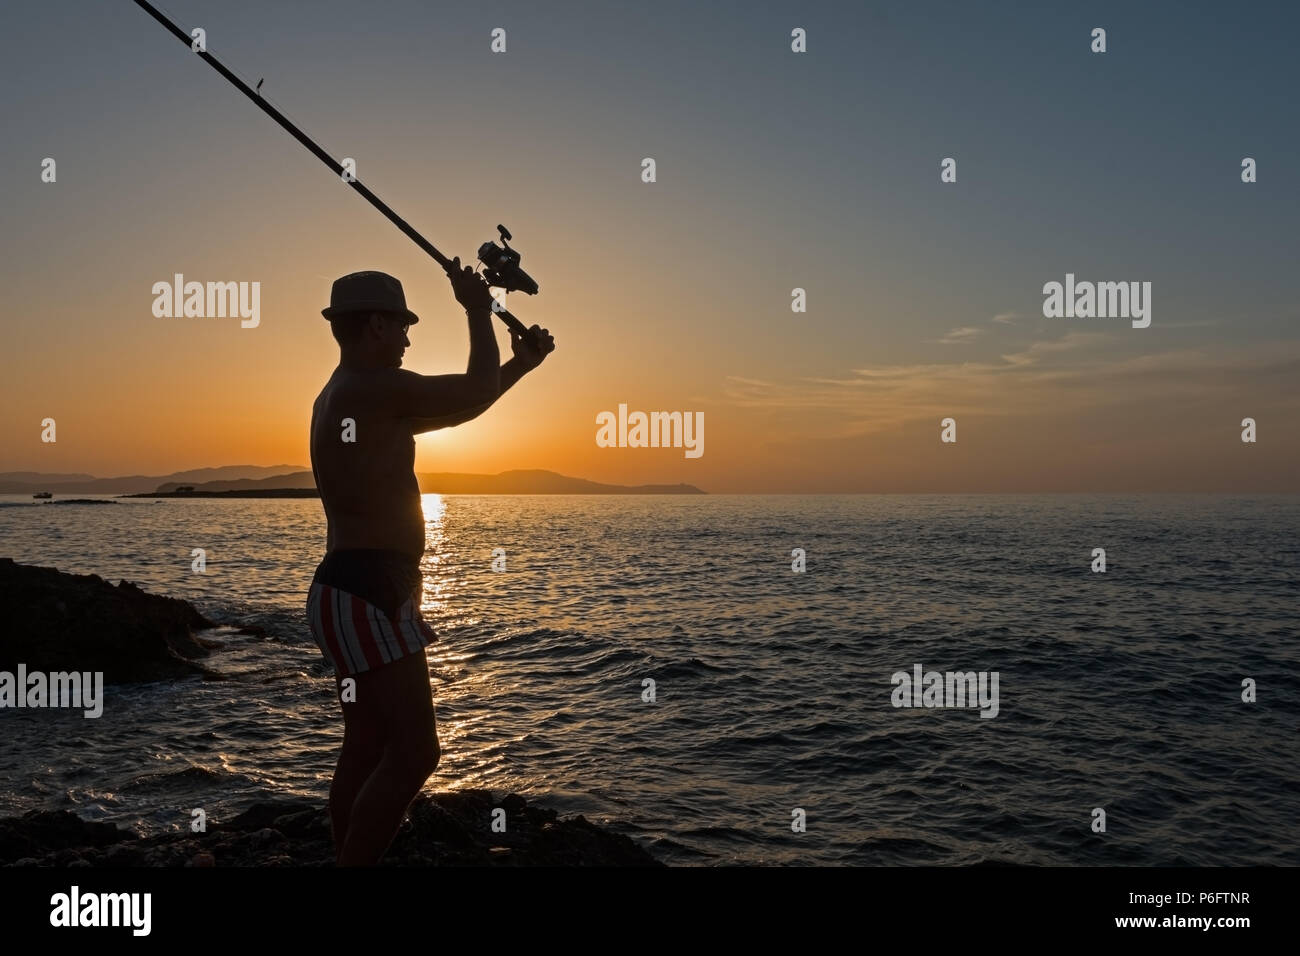 Adult male launches fishing rod at the seaside Stock Photo